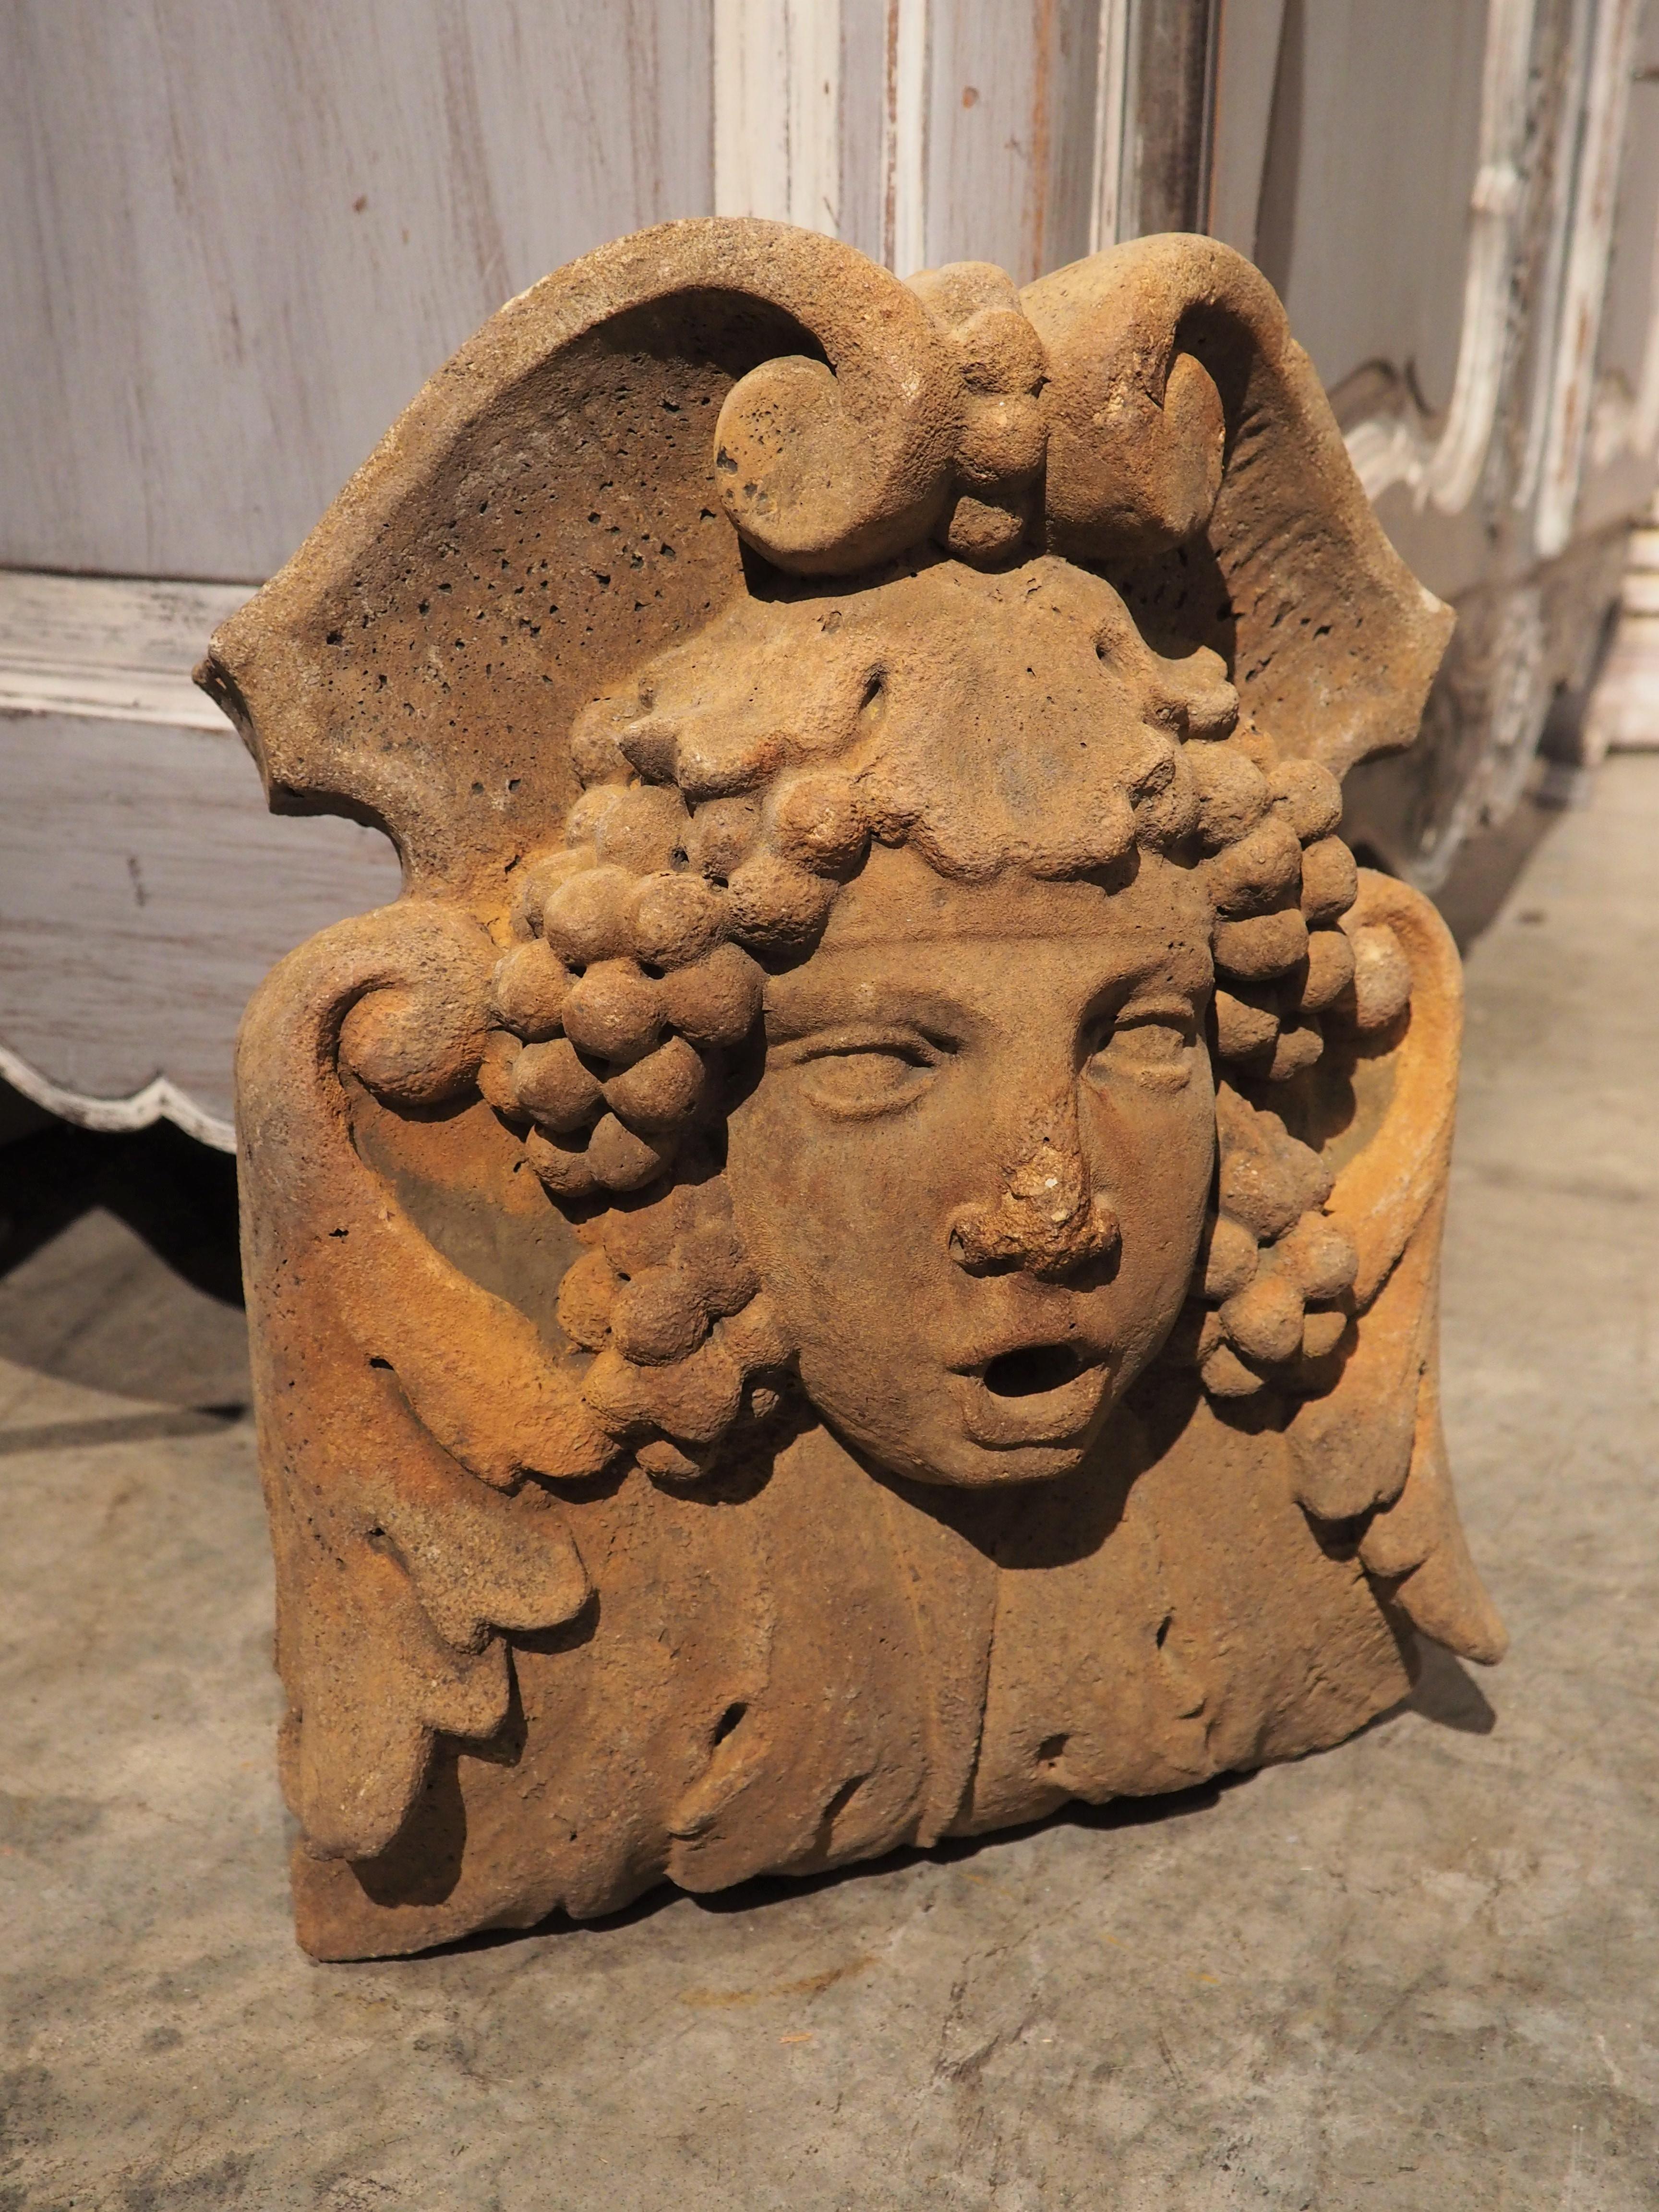 Bacchus, the Roman god of winemaking, is the subject of this small fountain mask element/spout; his Greek counterpart is known as Dionysus. Cast from reconstituted stone in France, the mascaron has been finished with an ochre color, but has